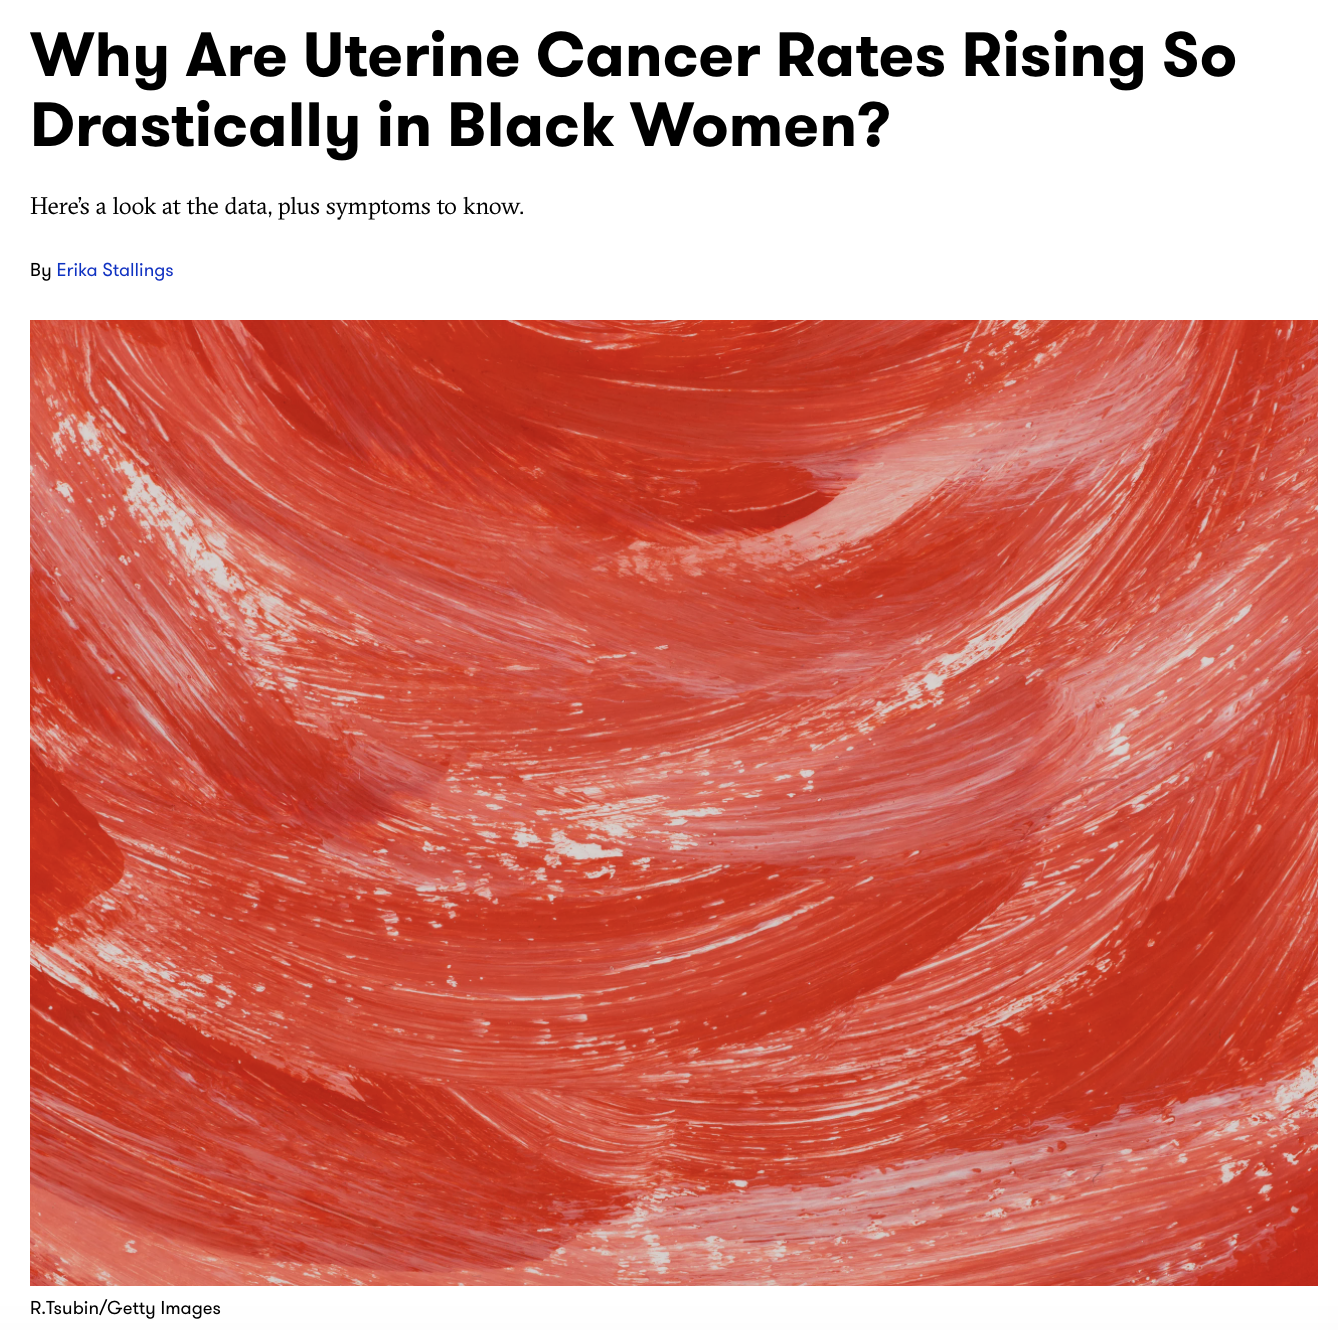 Red textured image with the article title, "Why Are Uterine Cancer Rates Rising So Drastically in Black Women?" above along with the subtitle: "Here’s a look at the data, plus symptoms to know." and the name of the author, Erika Stallings.